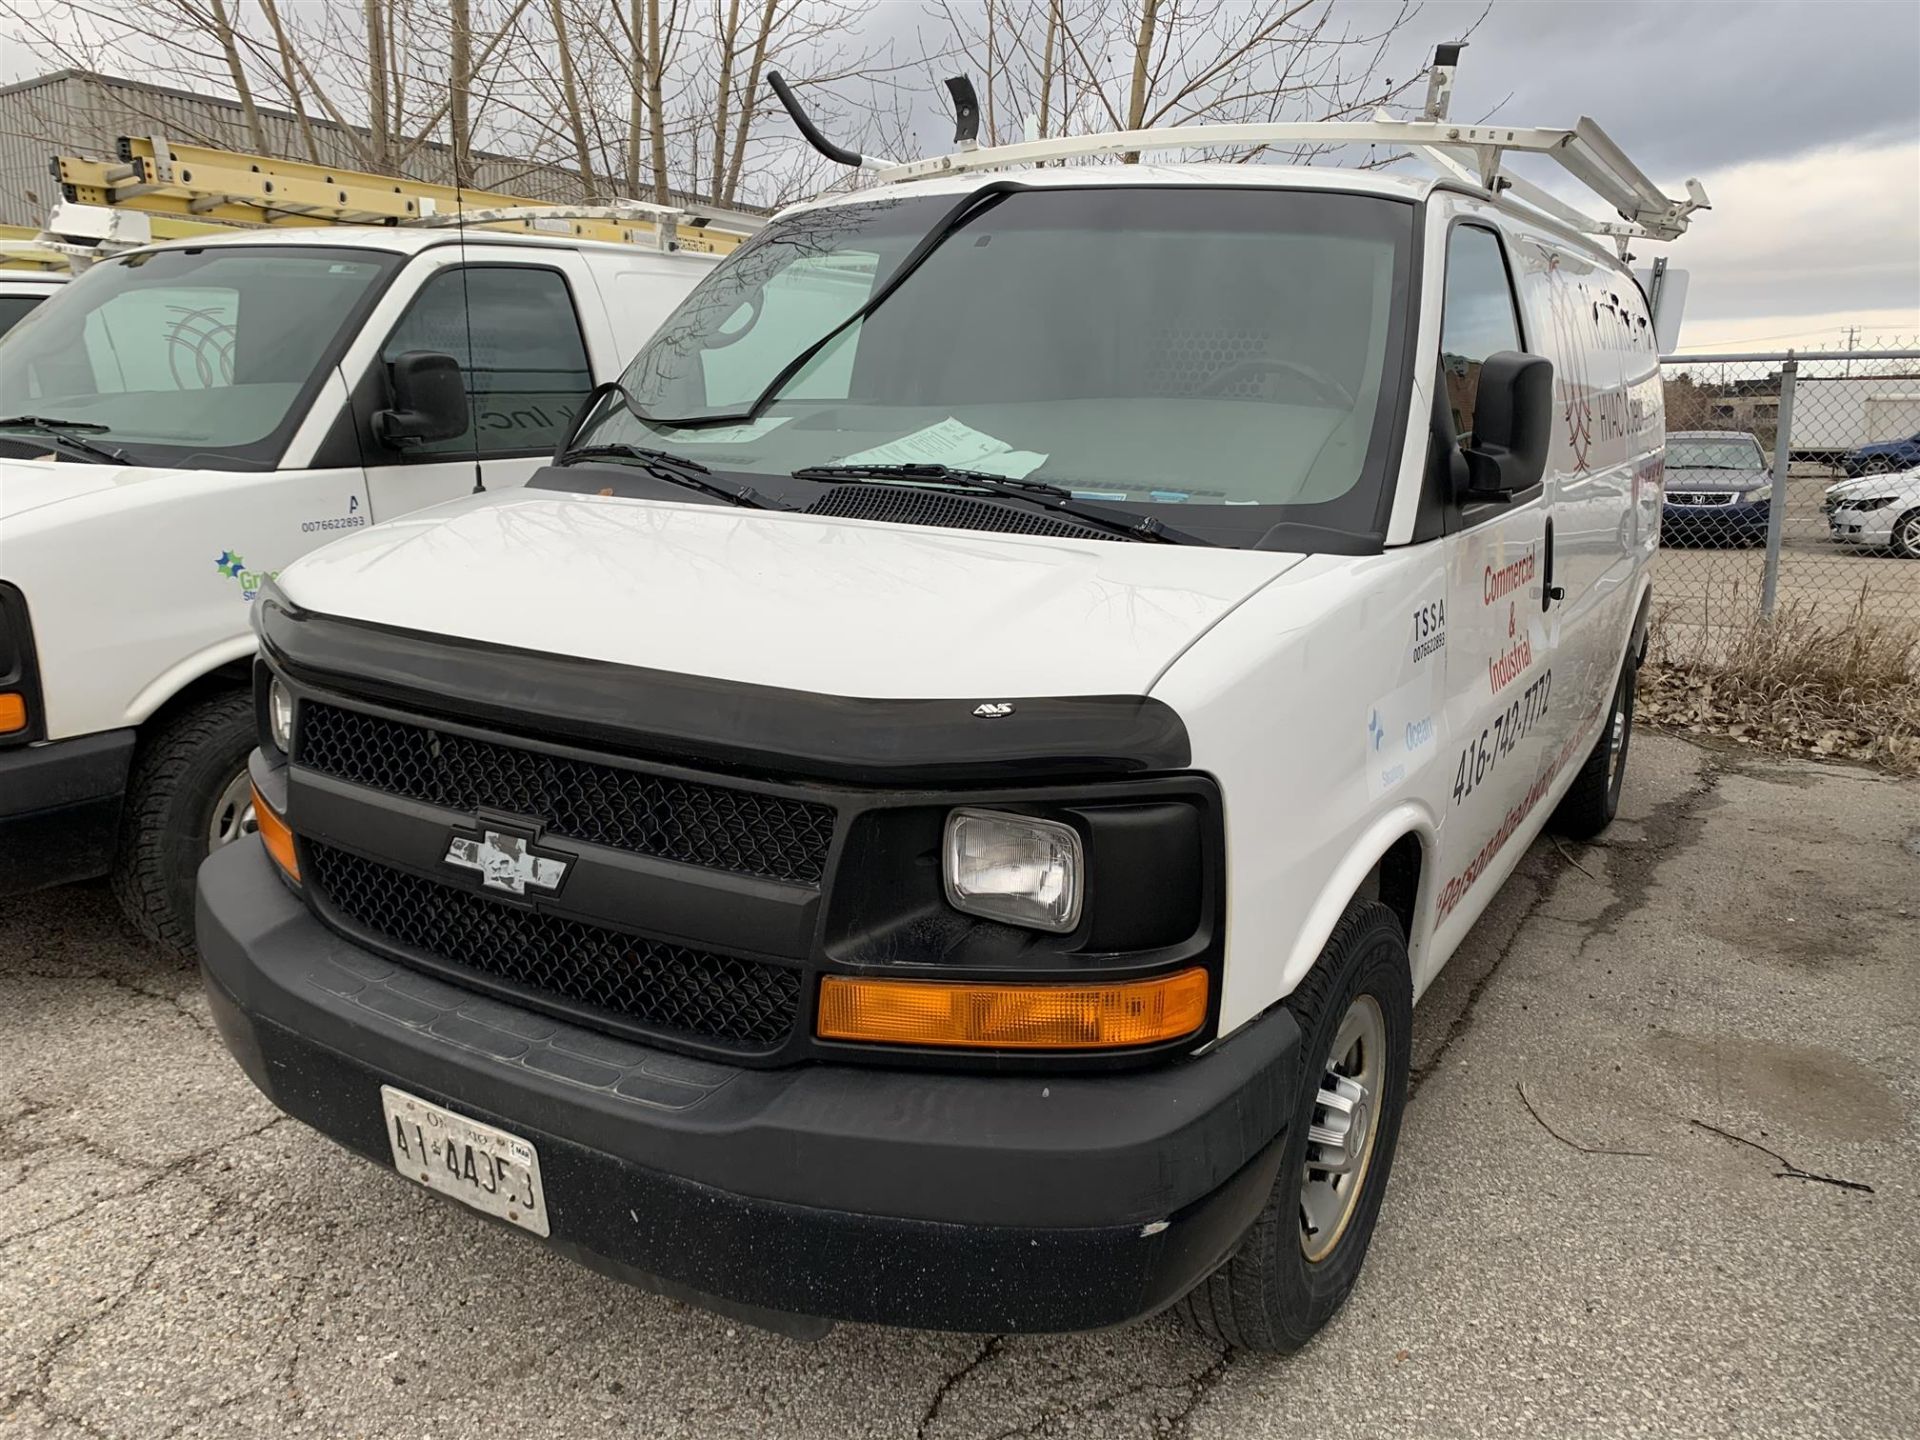 2014 CHEVY EXPRESS 2500 CARGO - 288,014KM - VIN # 1GCWGFCA9E1187267 ***ALL VEHICLES ARE SOLD AS IS